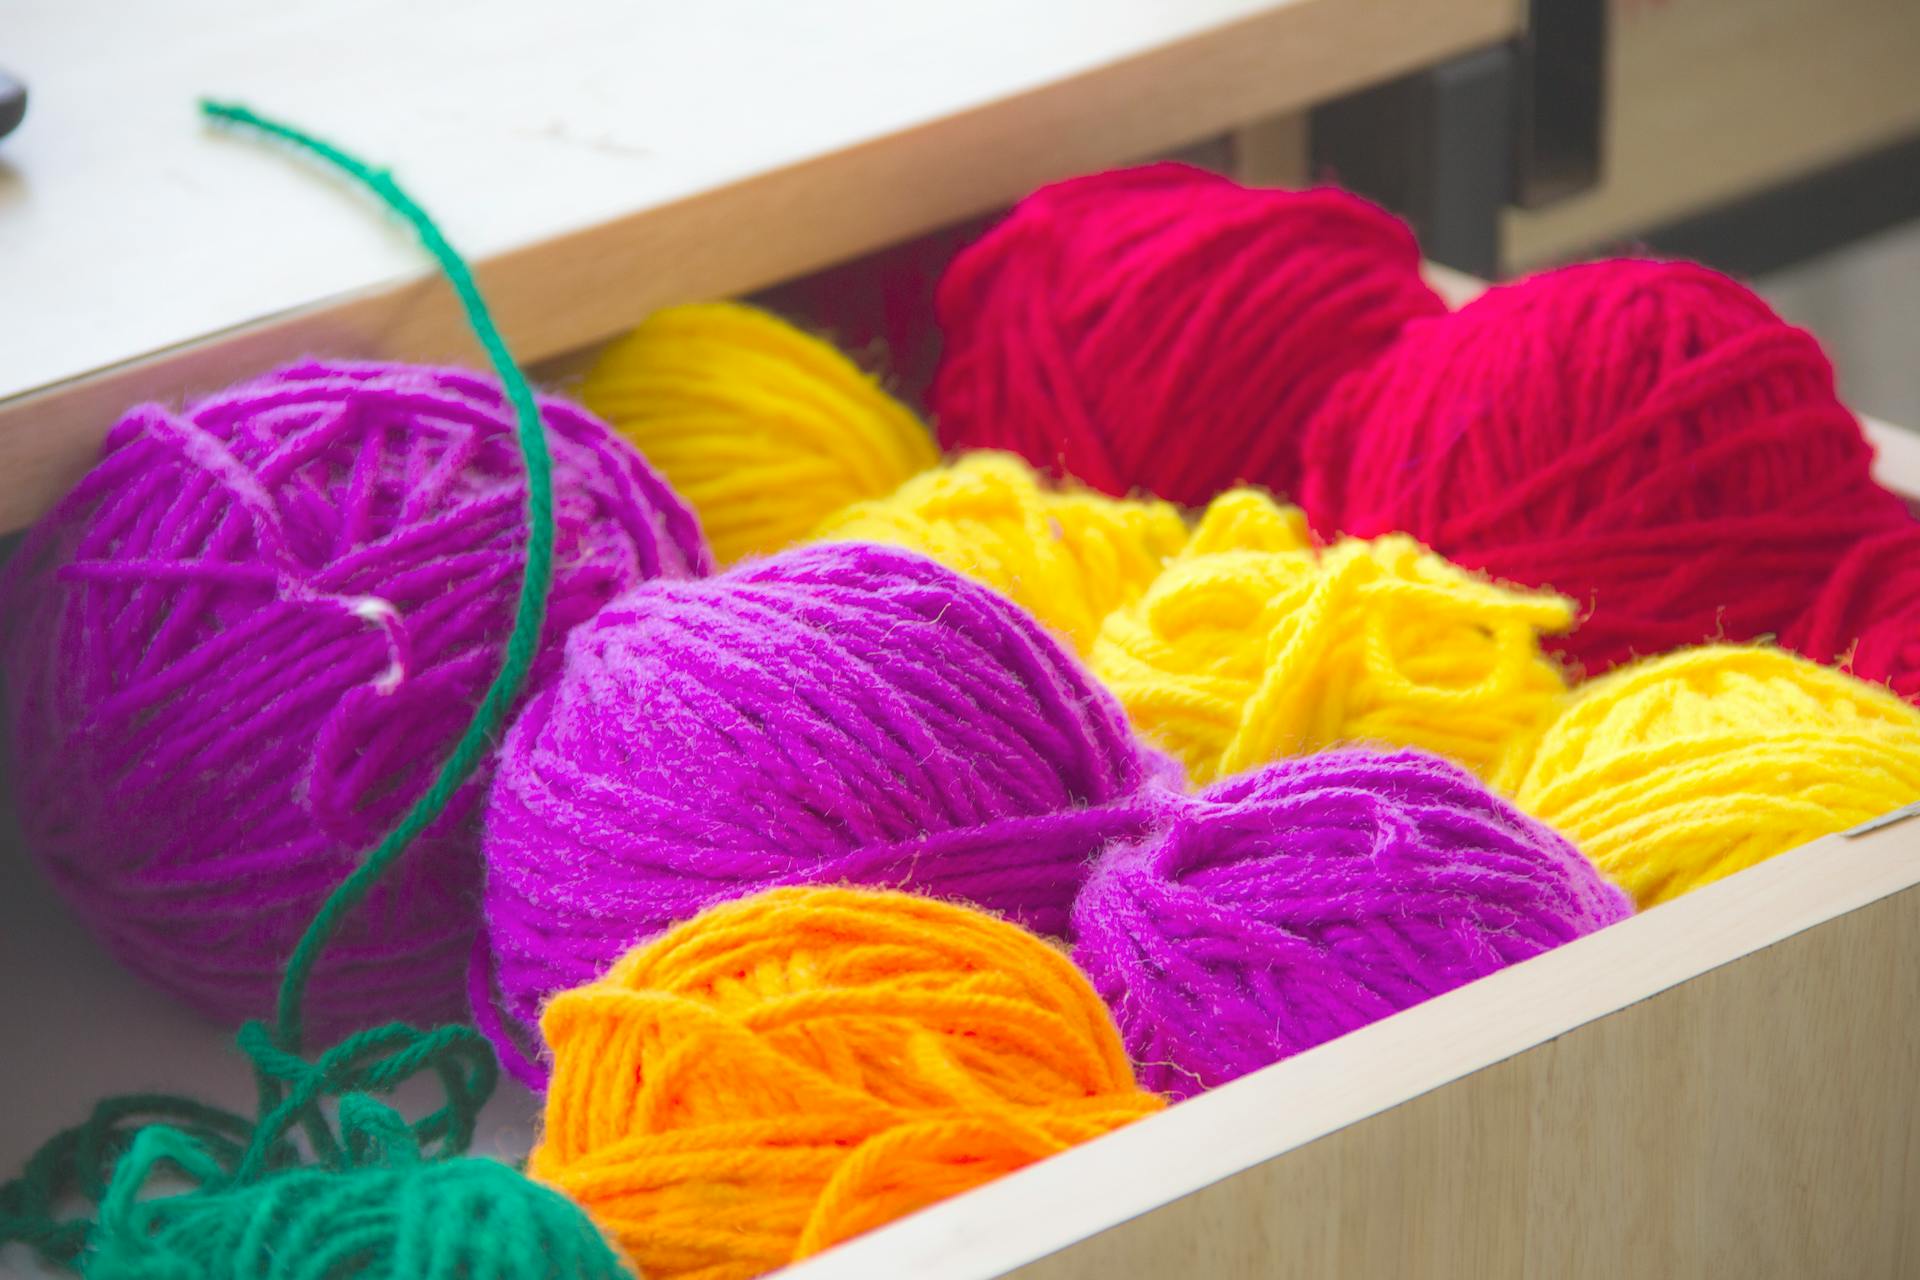 Colorful balls of yarn in a drawer | Source: Pexels